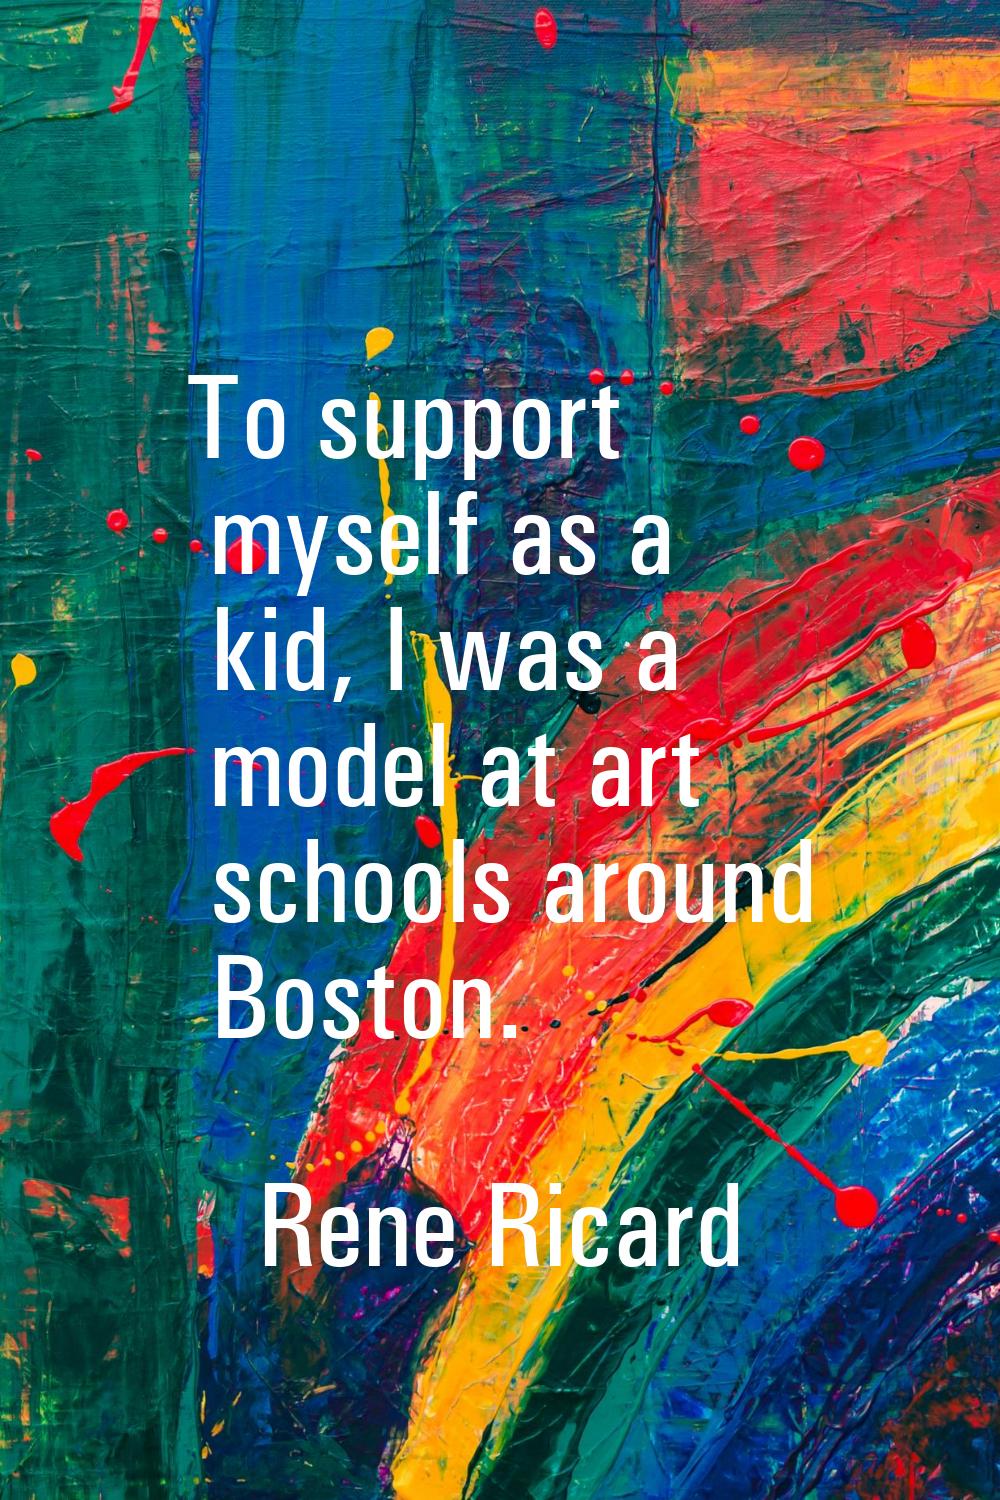 To support myself as a kid, I was a model at art schools around Boston.